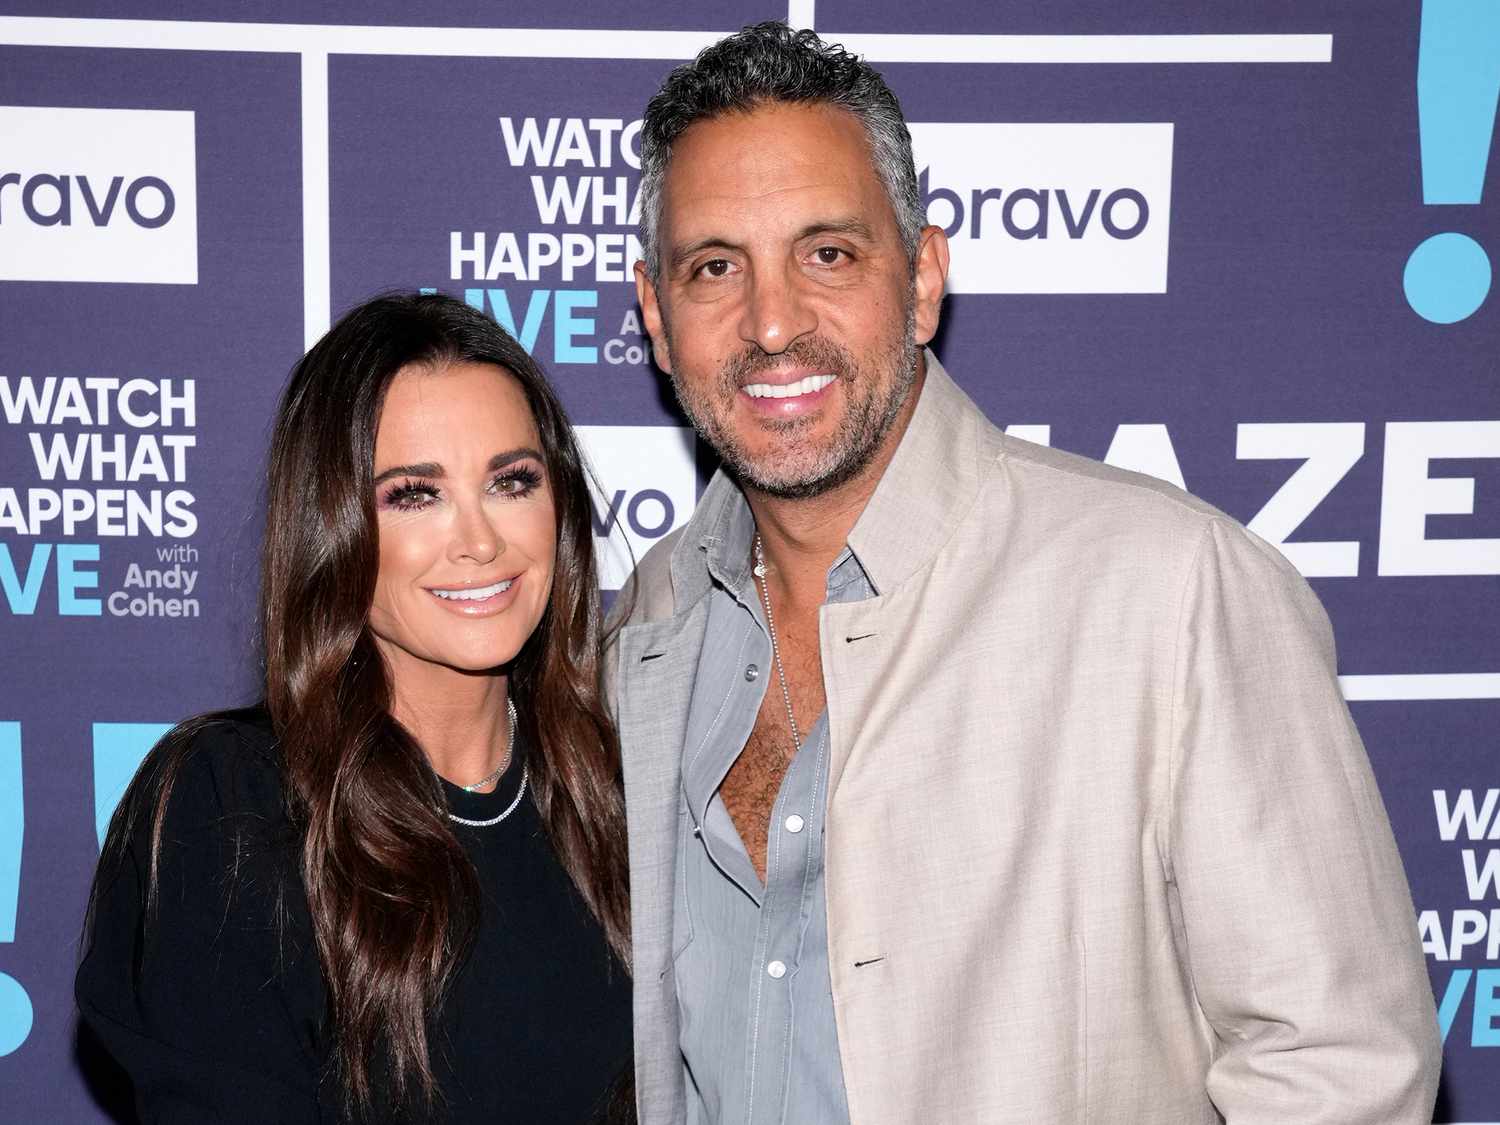 Kyle Richards and Mauricio Umansky Have Separated After 27 Years of Marriage